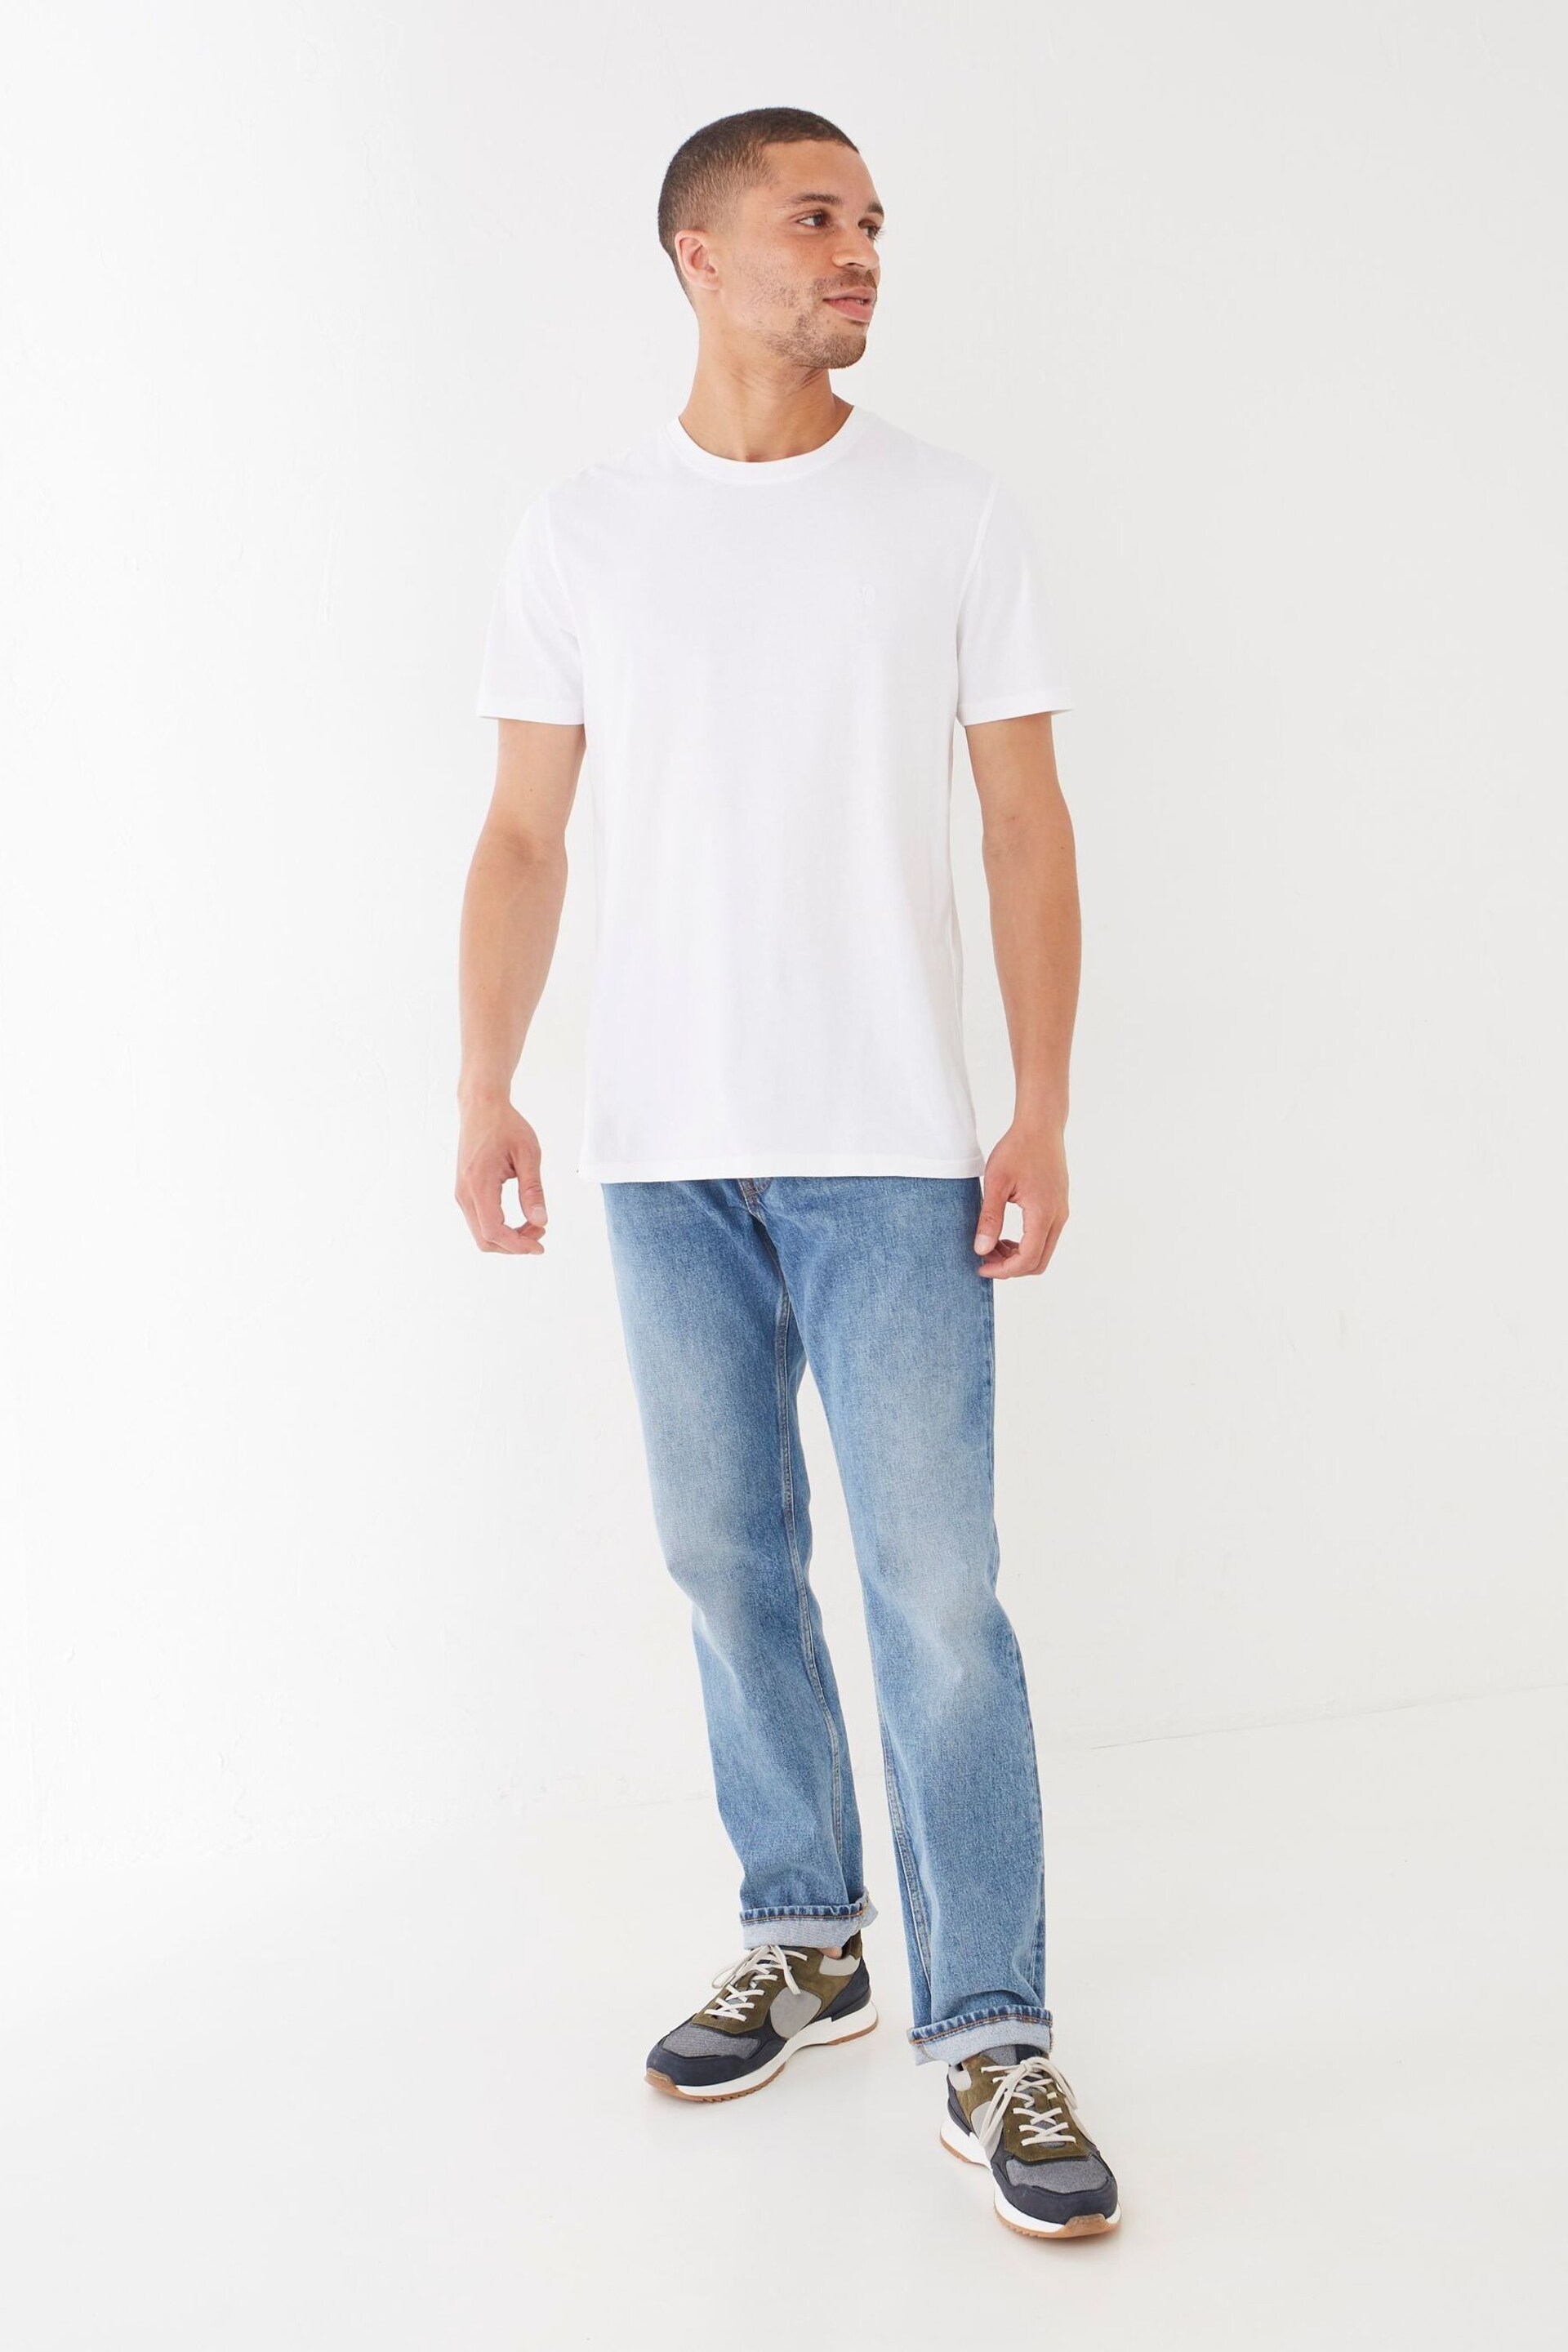 FatFace White T-Shirt - Image 3 of 5